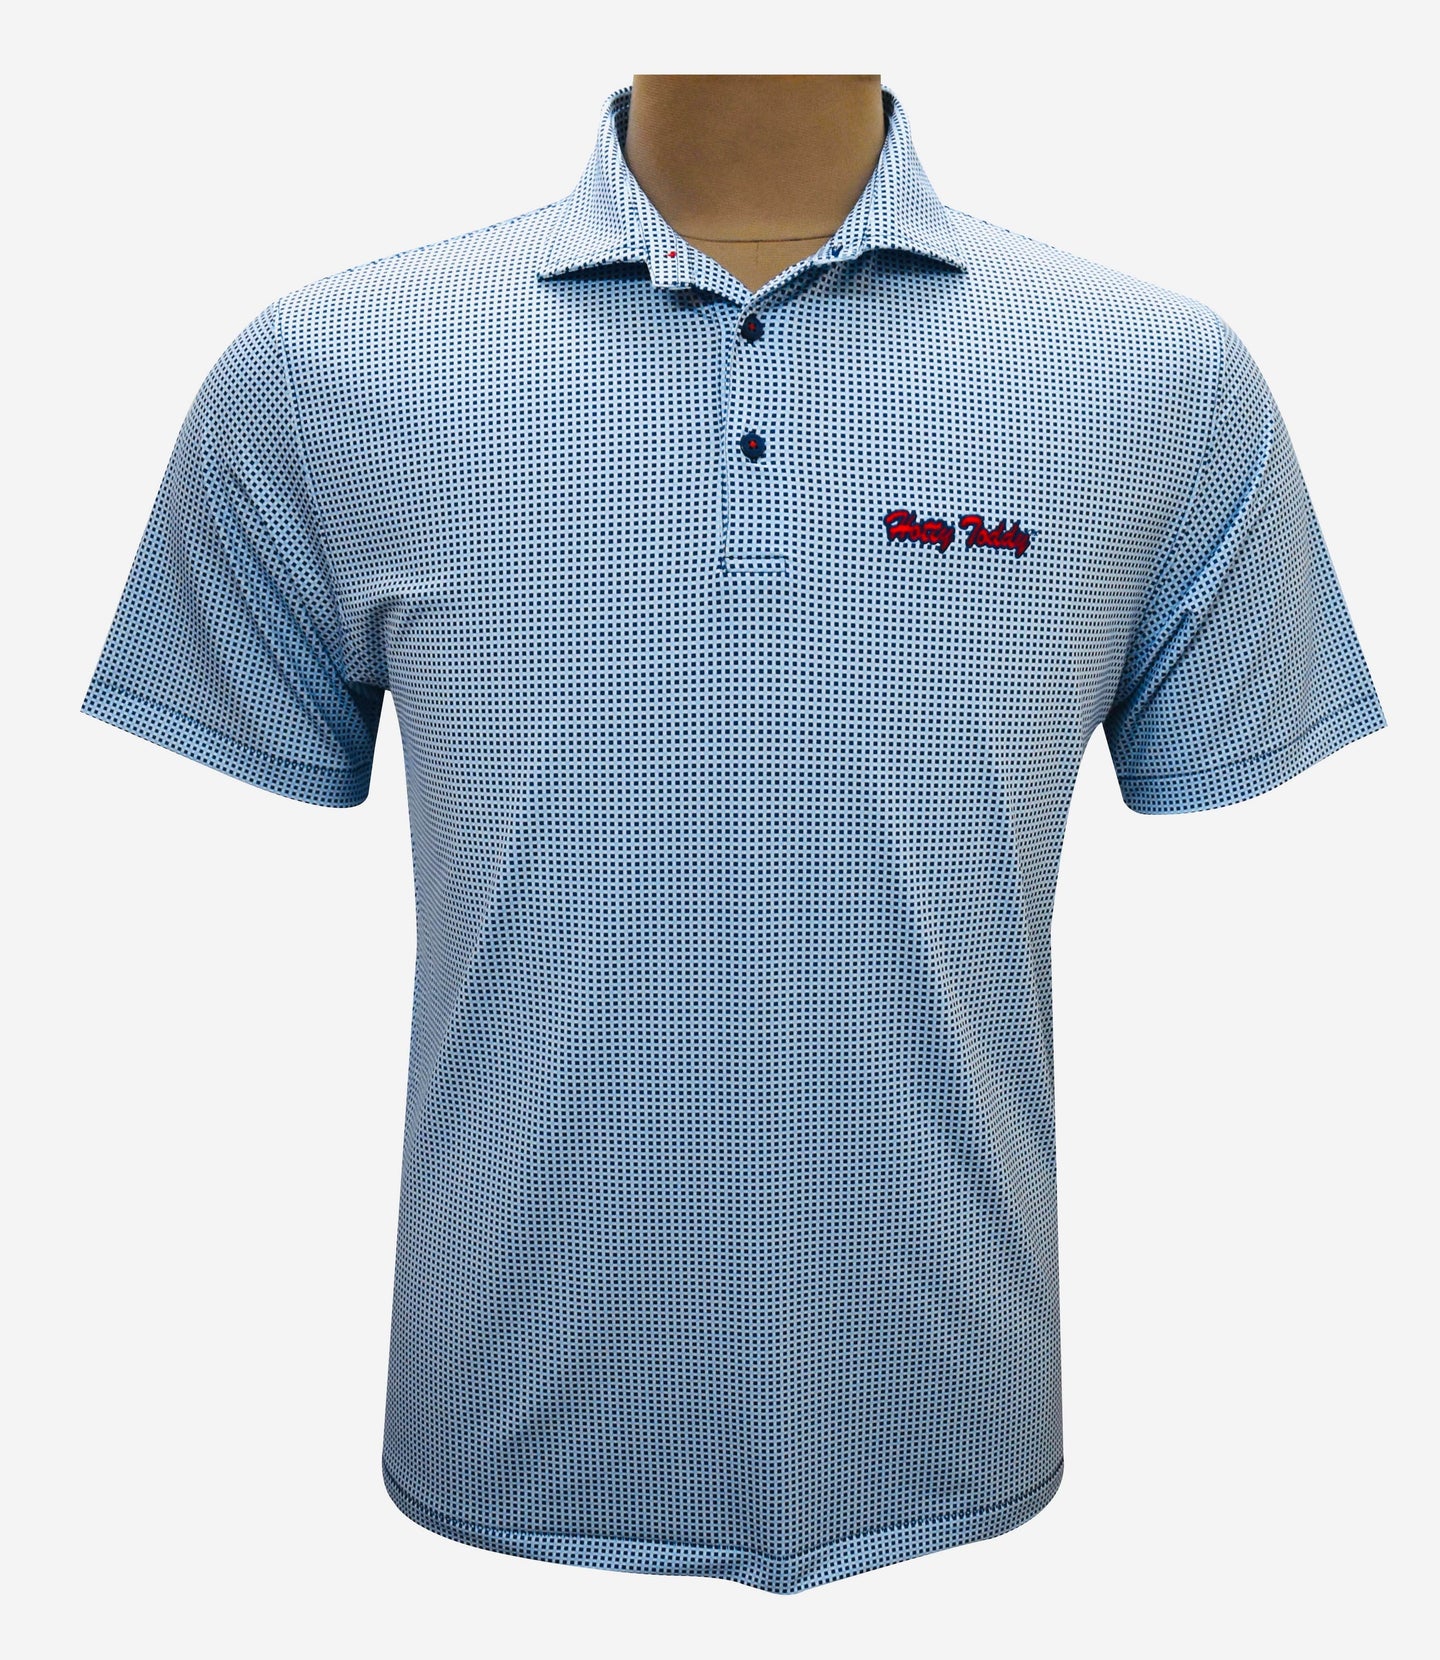 HORN LEGEND SHIRTS - POLO HOTTY TODDY CHECK POLO